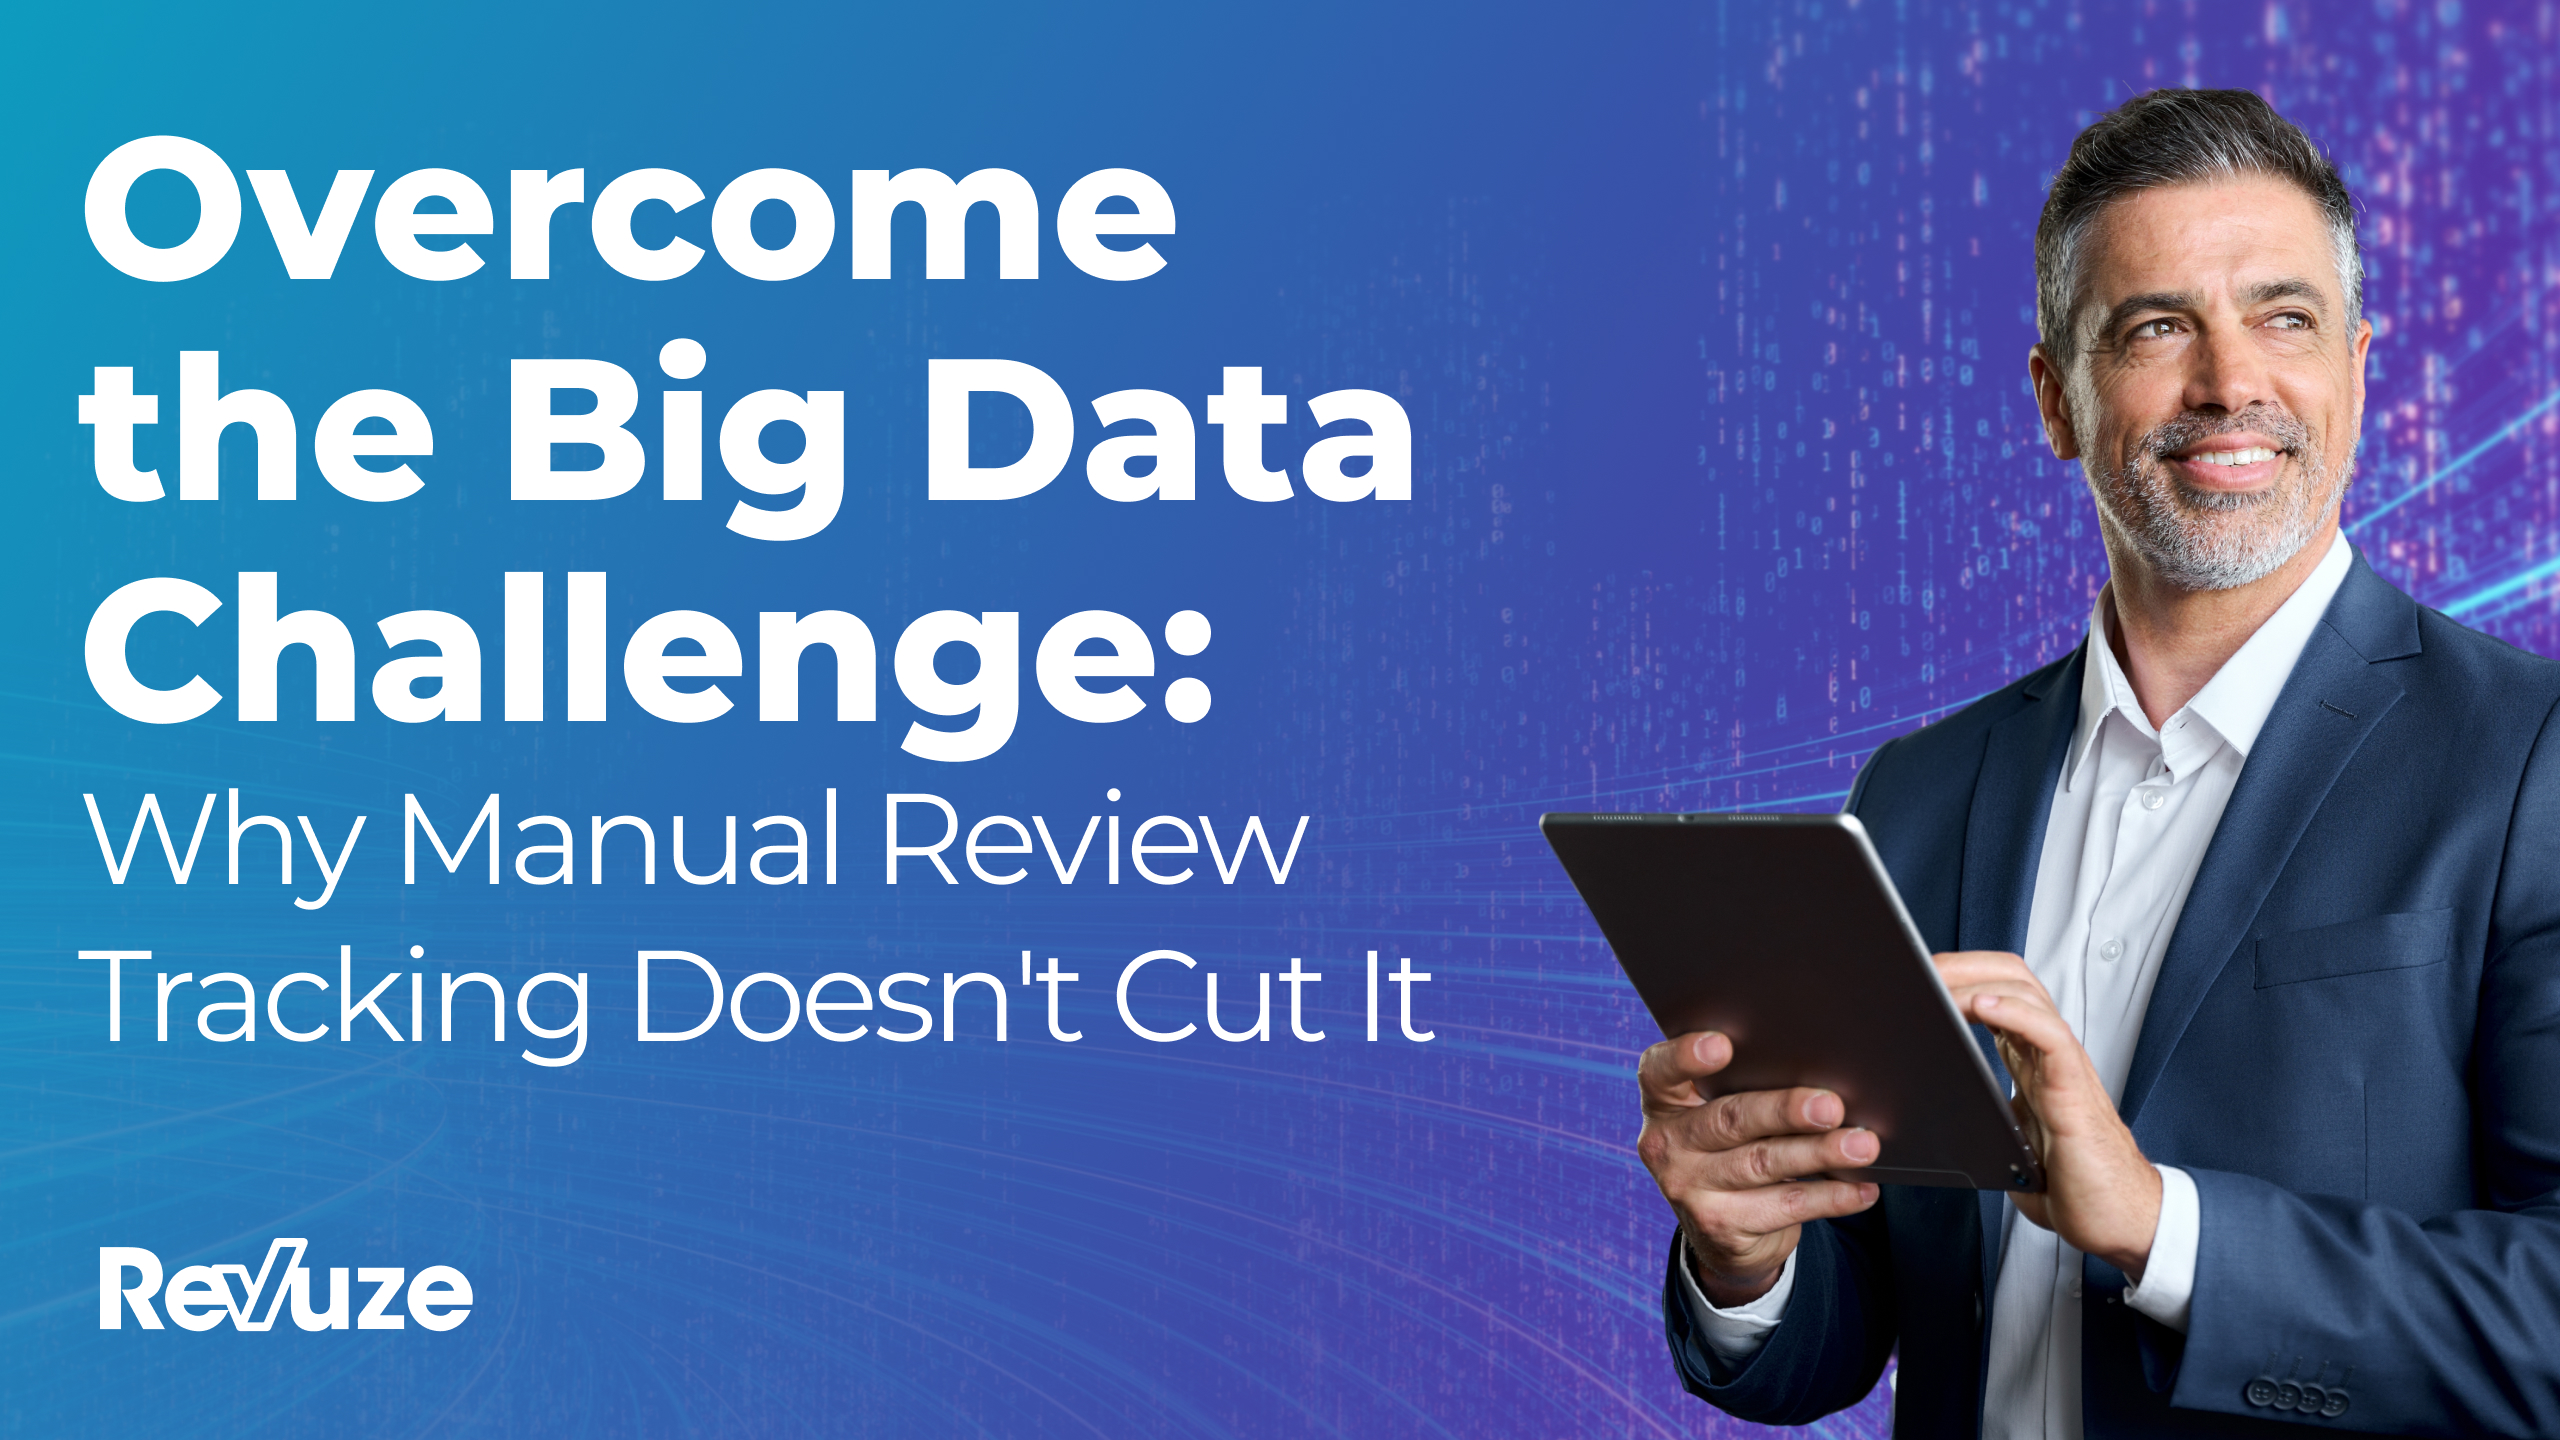 Overcome the Big Data Challenge: Why Manual Review Tracking Doesn’t Cut It